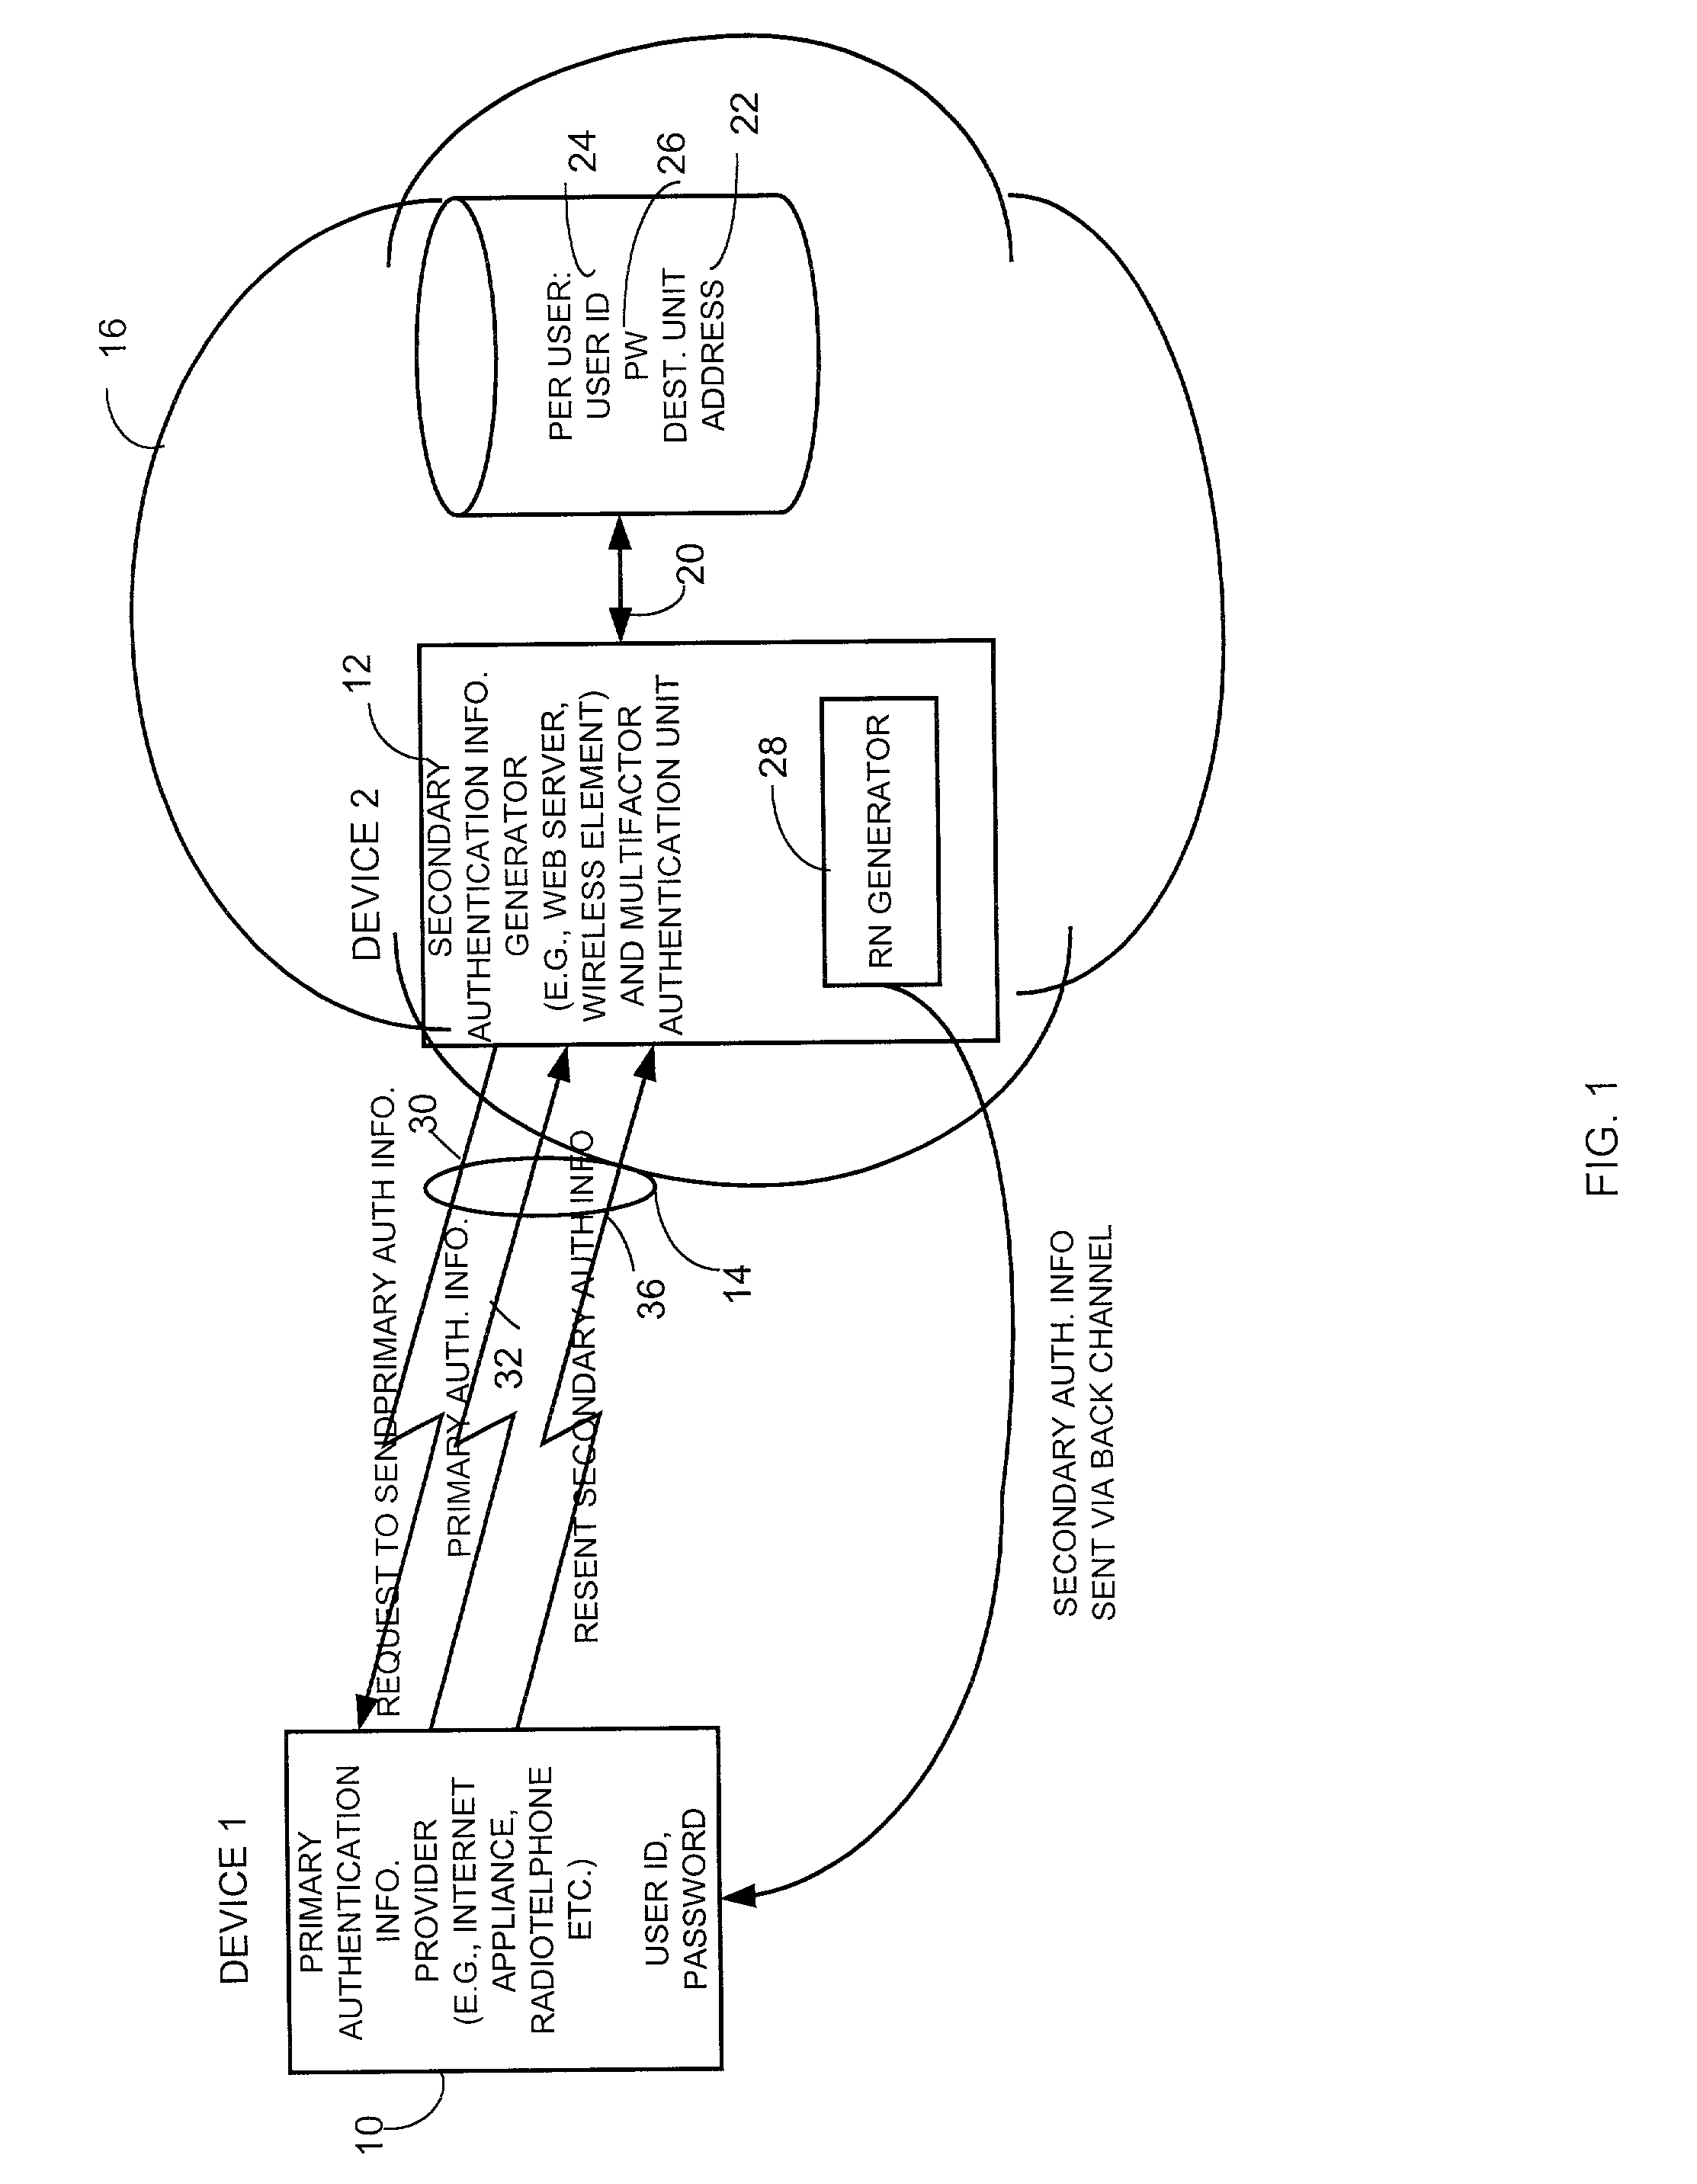 Method and apparatus for providing user authentication using a back channel